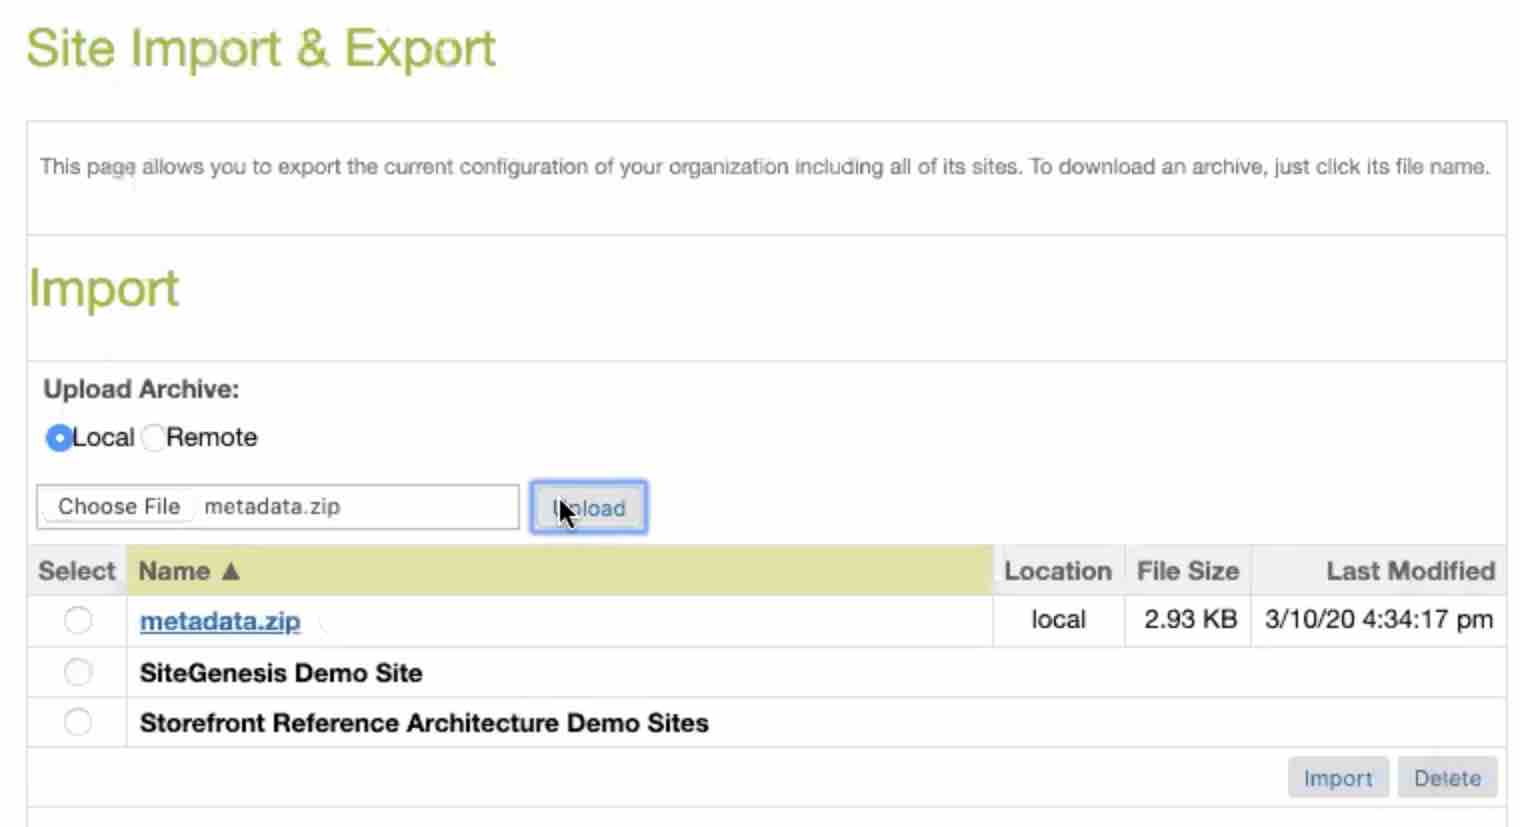 Site Import & Export page with Upload selected